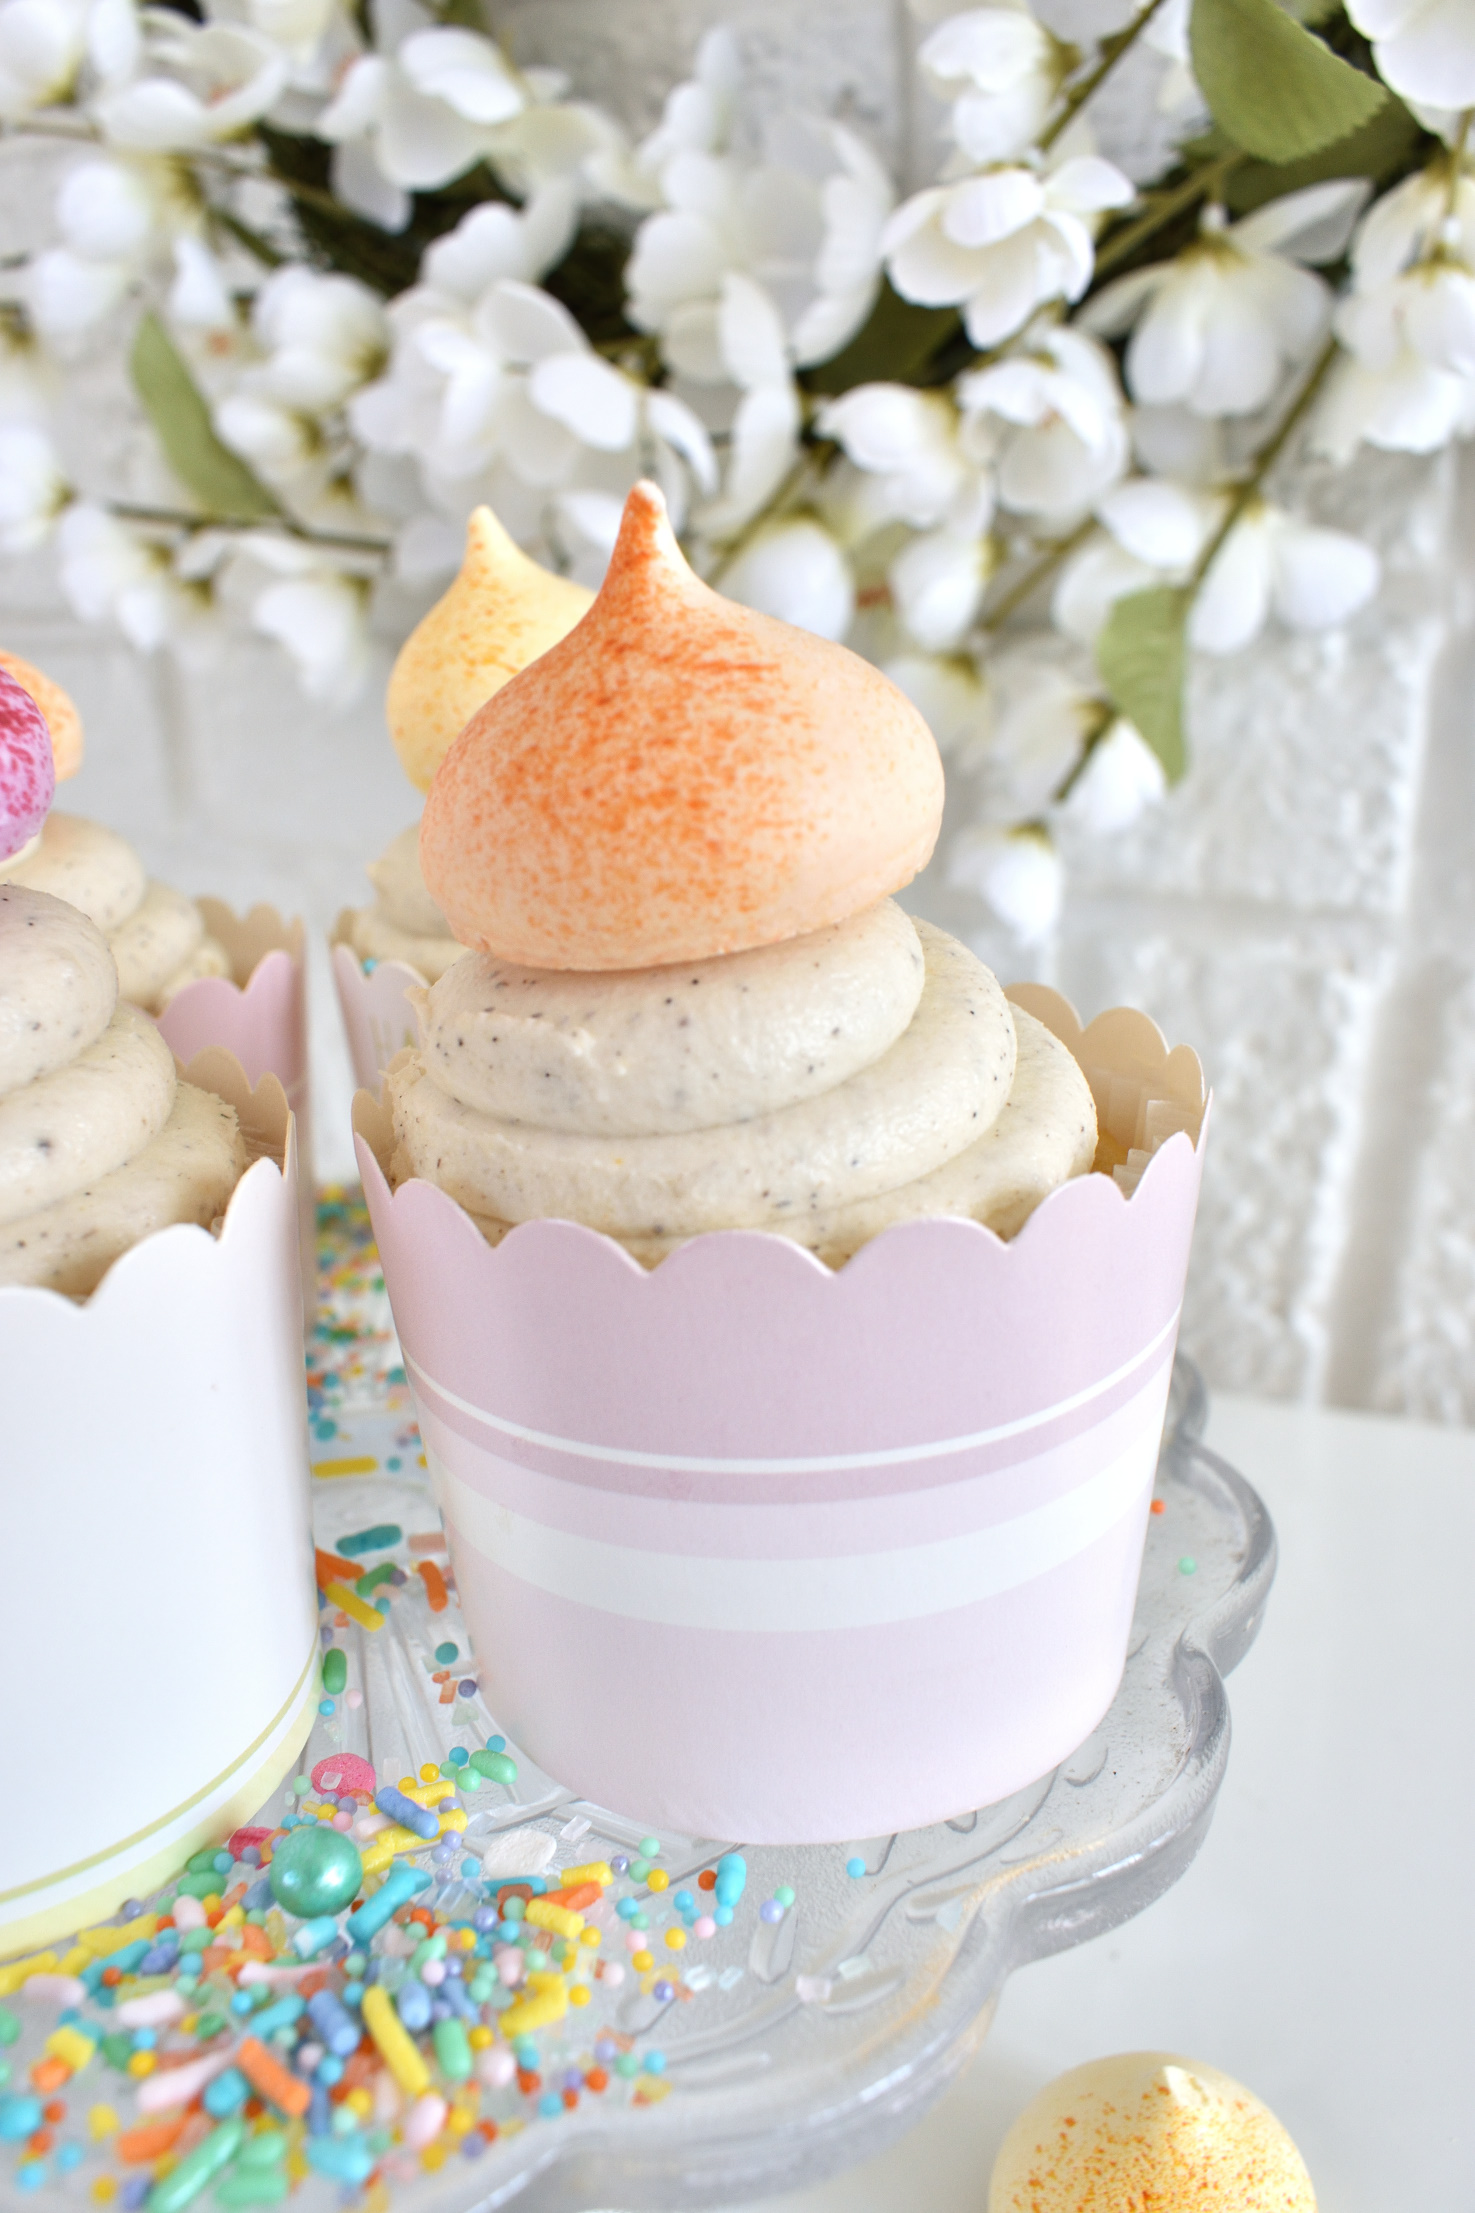 Easy cupcake decorations for Easter